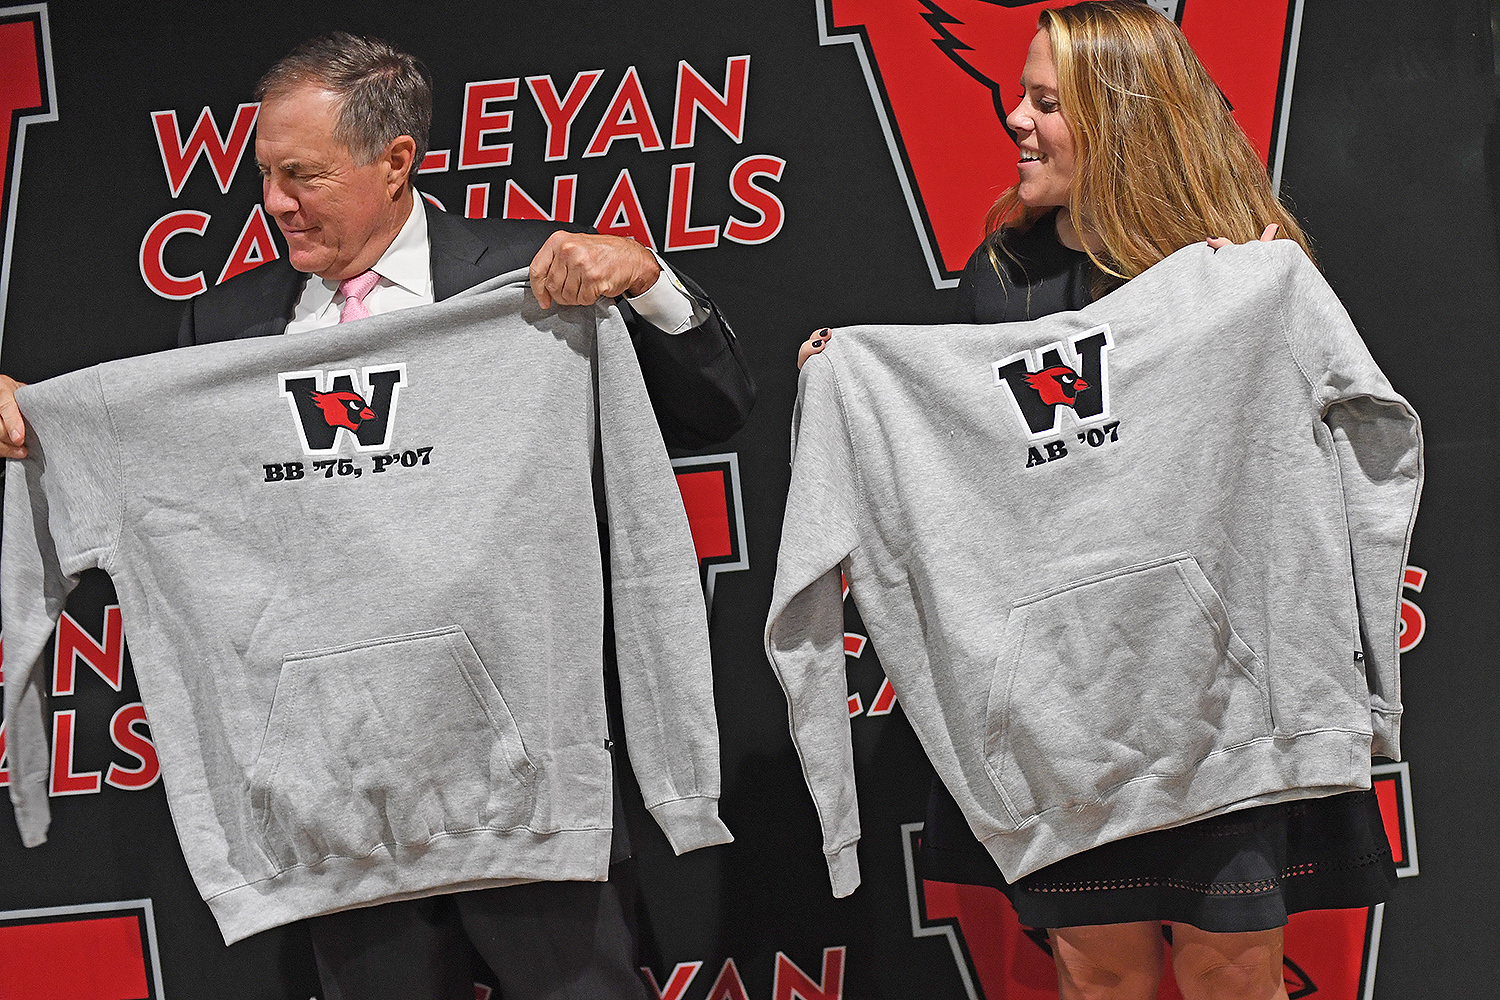 Mike Whalen, the Frank V. Sica Director of Athletics, presented personalized sweatshirts to Bill and Amanda Belichick.